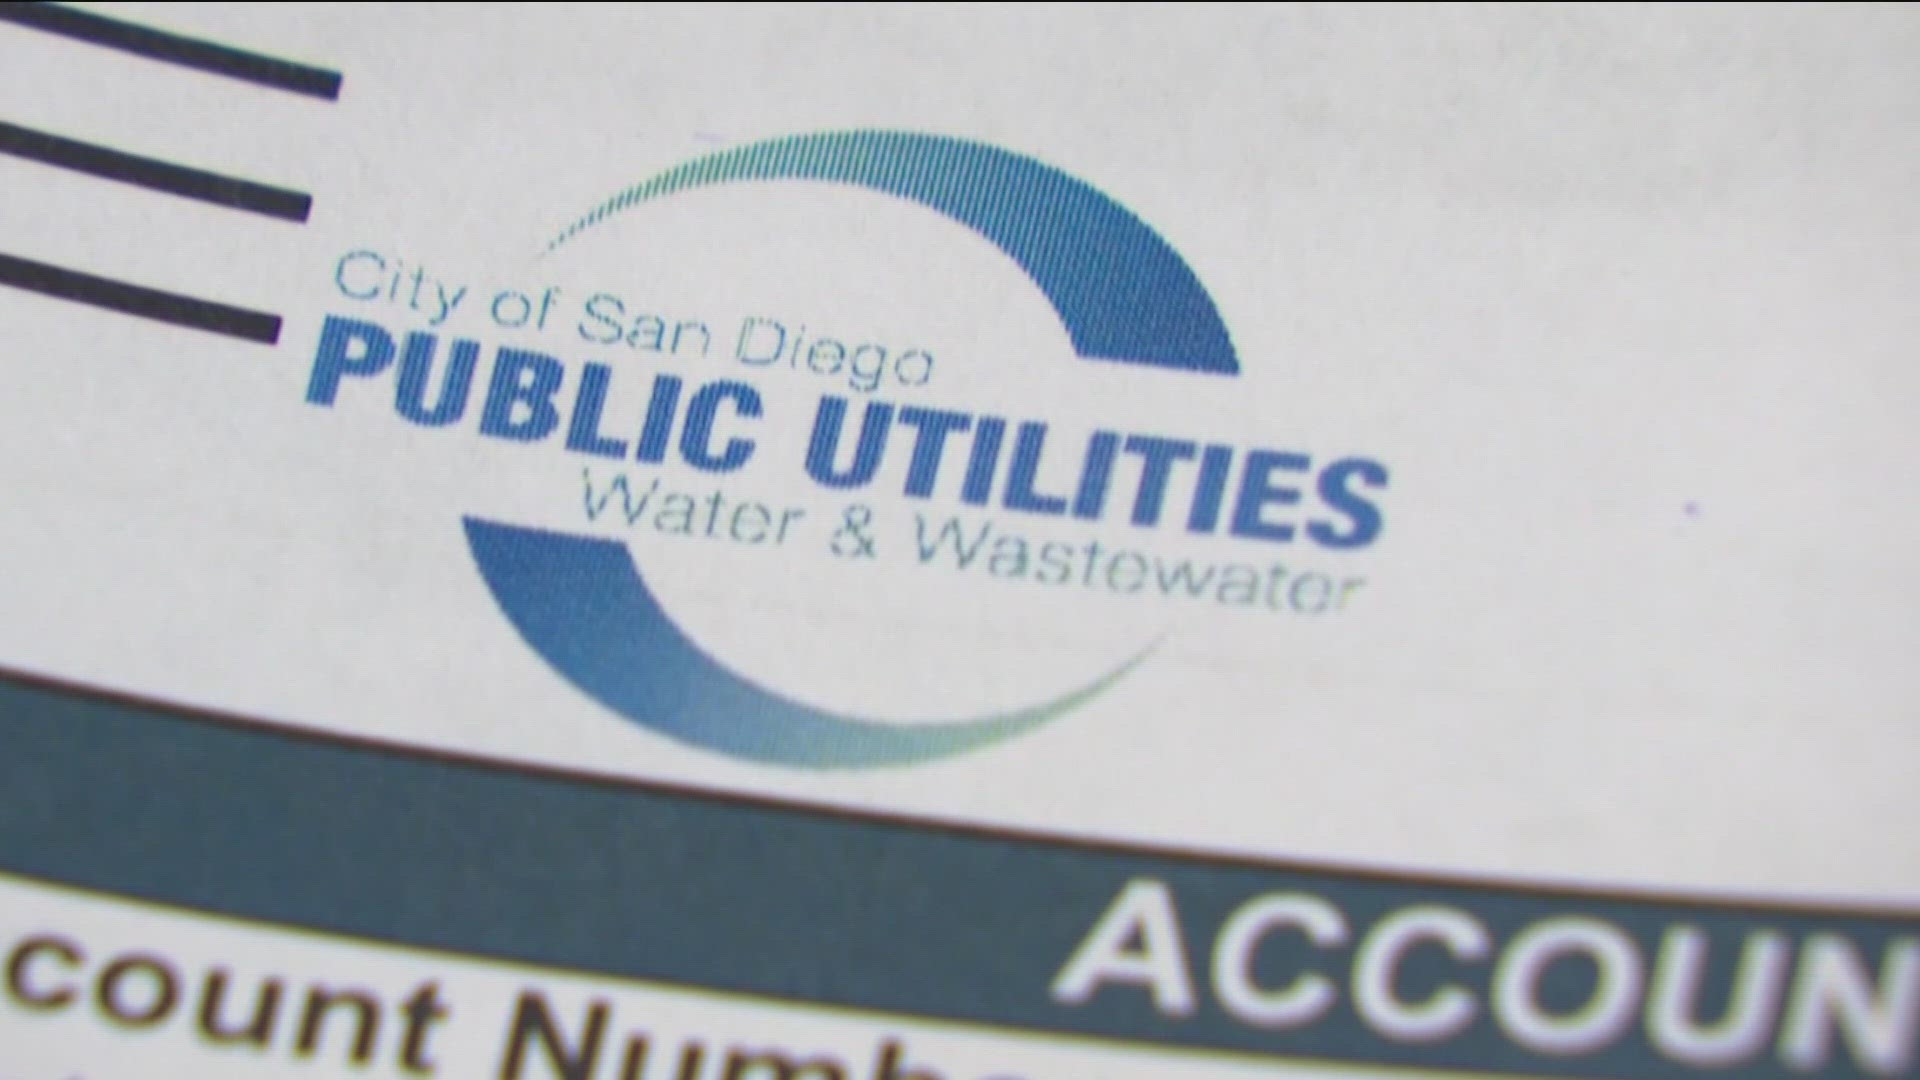 CBS 8 is Working for You to follow up with the Public Utility Department on their progress.